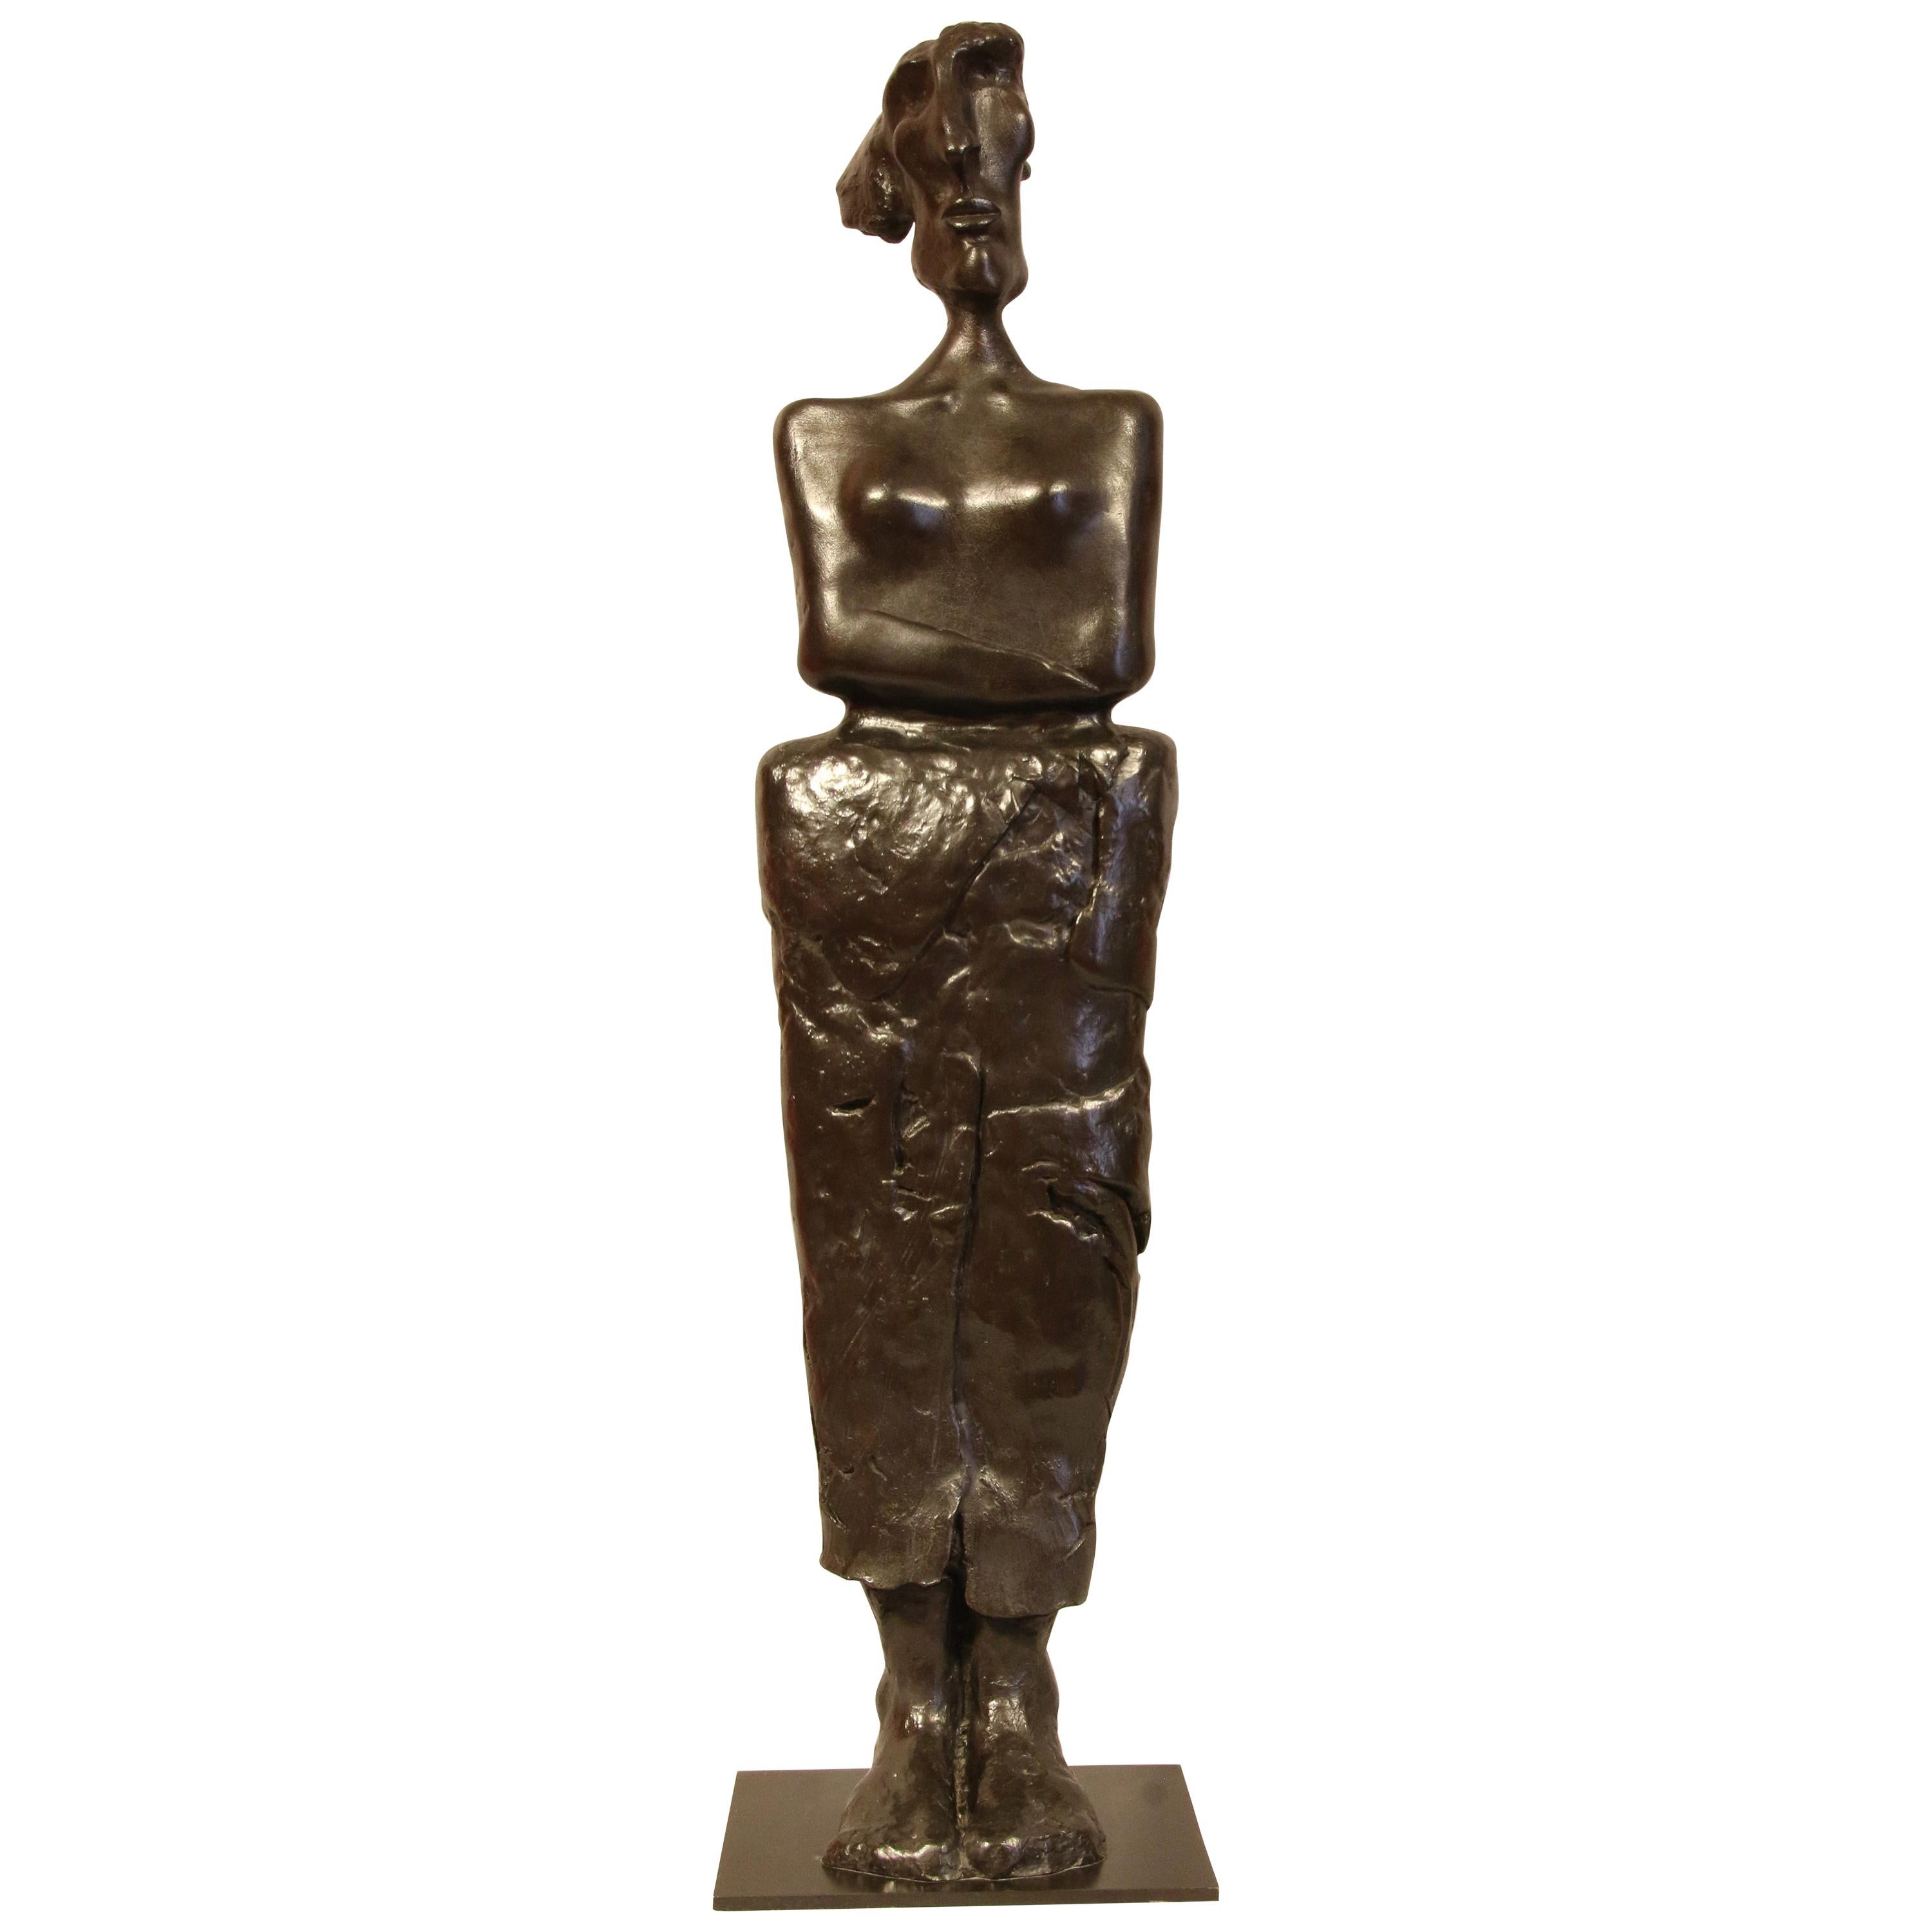 Bronze Sculpture "Chained woman" 2000, by Jacques Tenenhaus